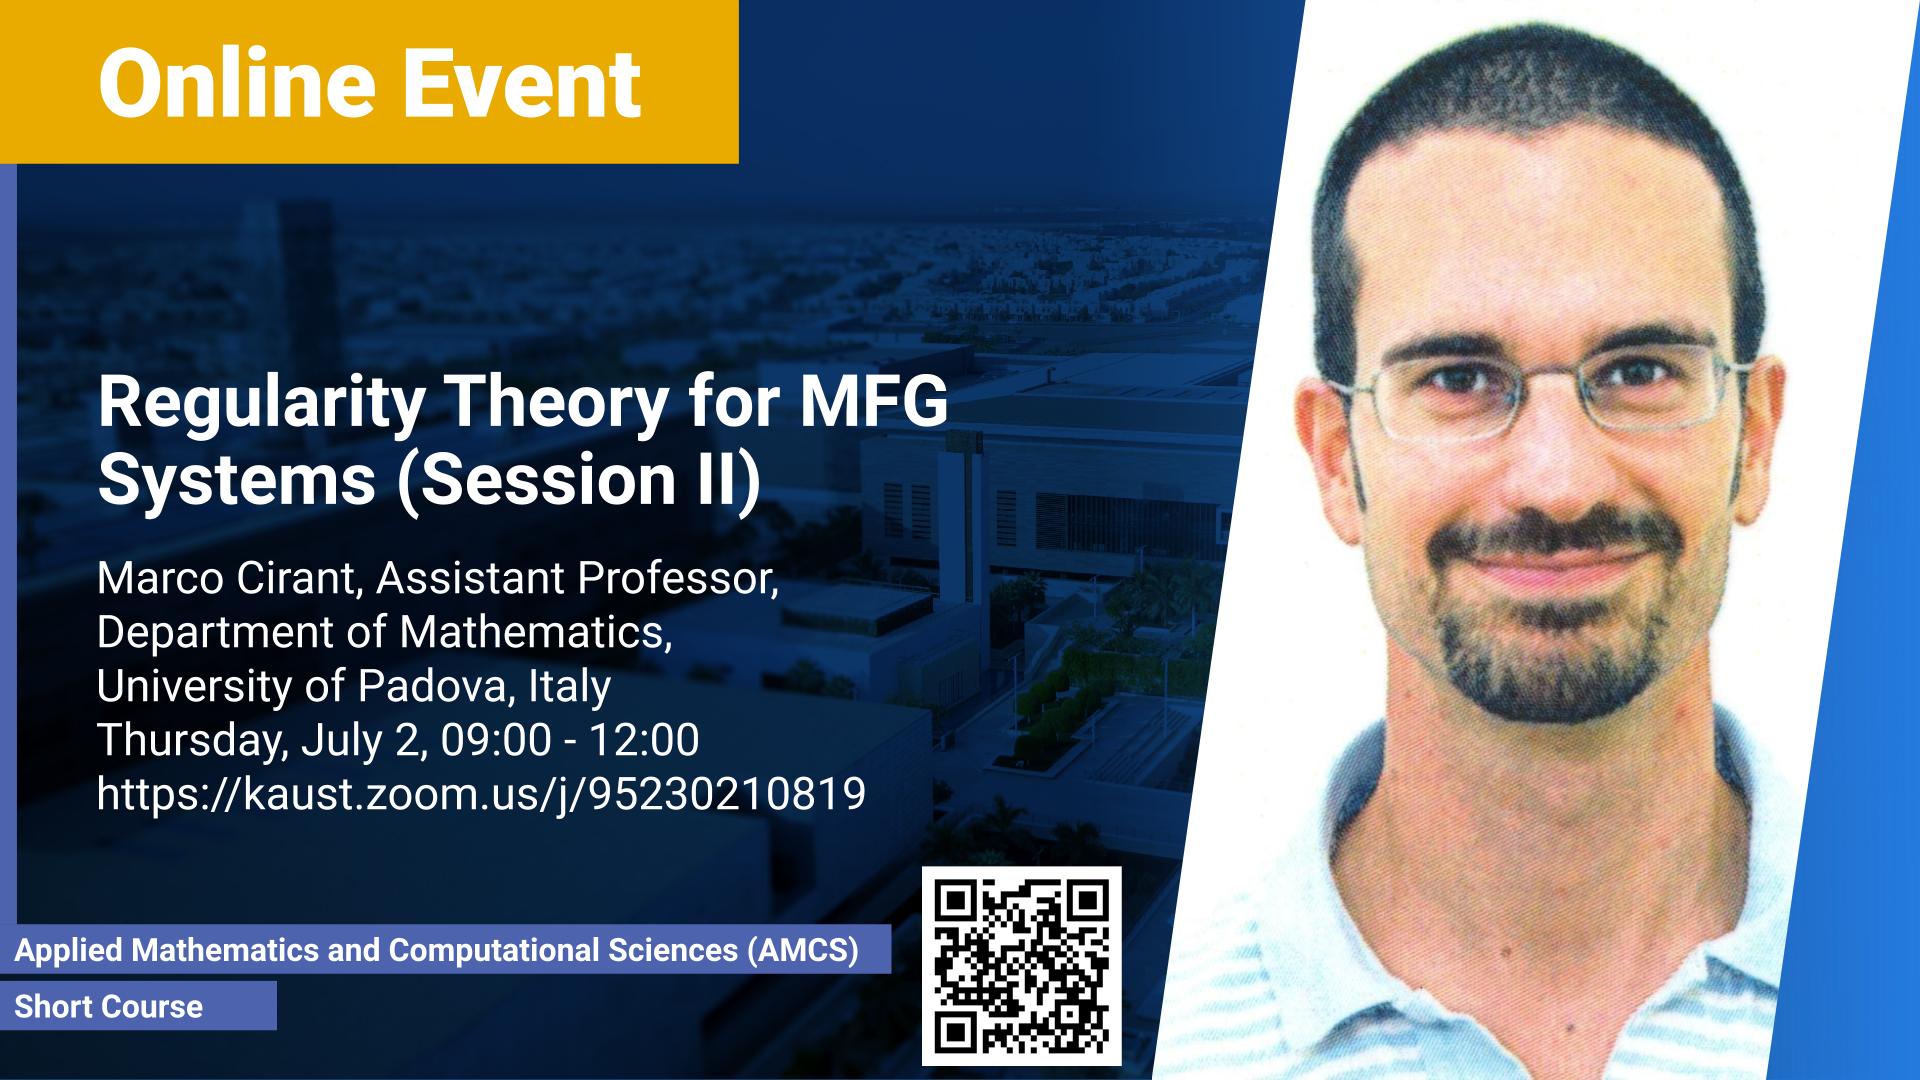 KAUST-CEMSE-AMCS-Short Course-Marco Cirant-Regularity Theory for MFG Systems (Session II)